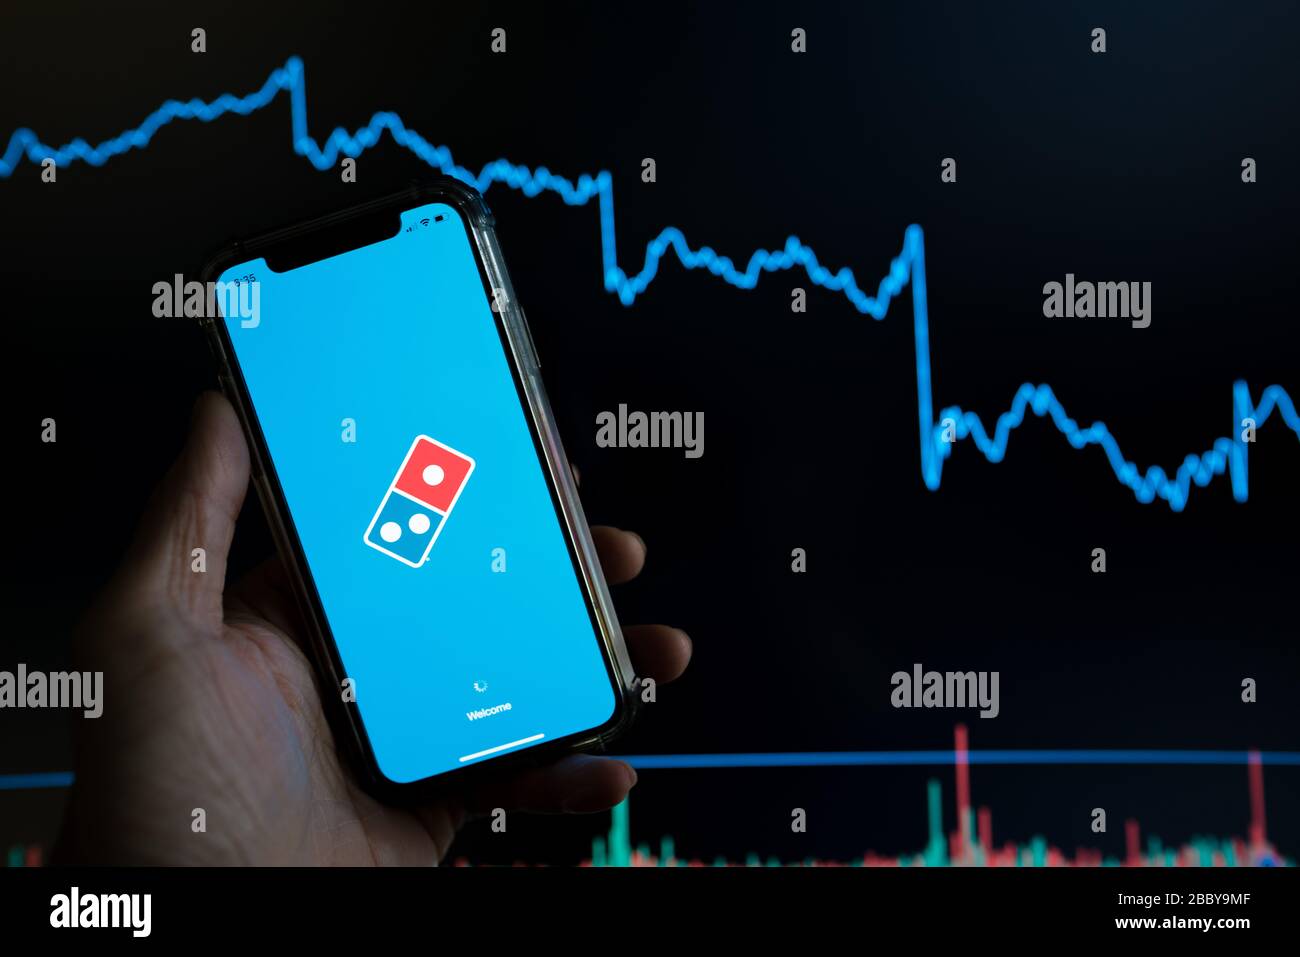 Domino's pizza mobile delivery app held against a dark stock trading chart going down in value Stock Photo